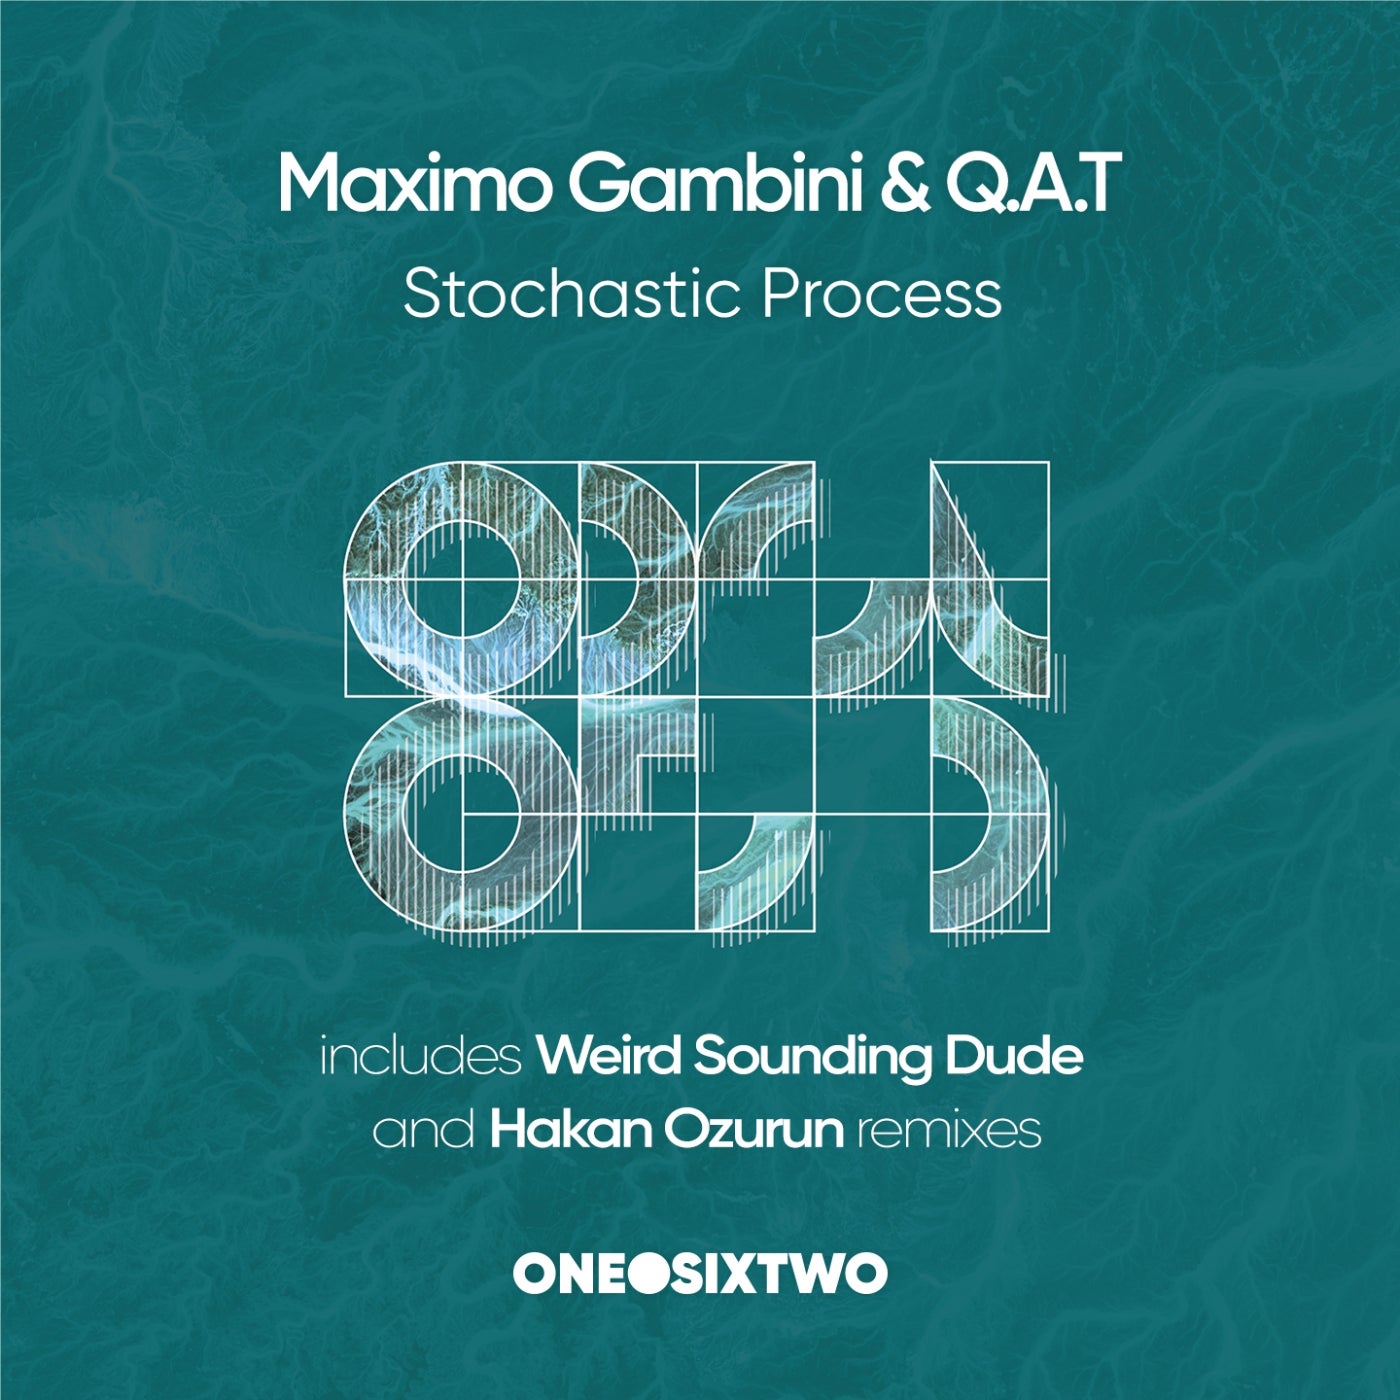 Maximo Gambini & Q.A.T - Stochastic Process [ODST053]